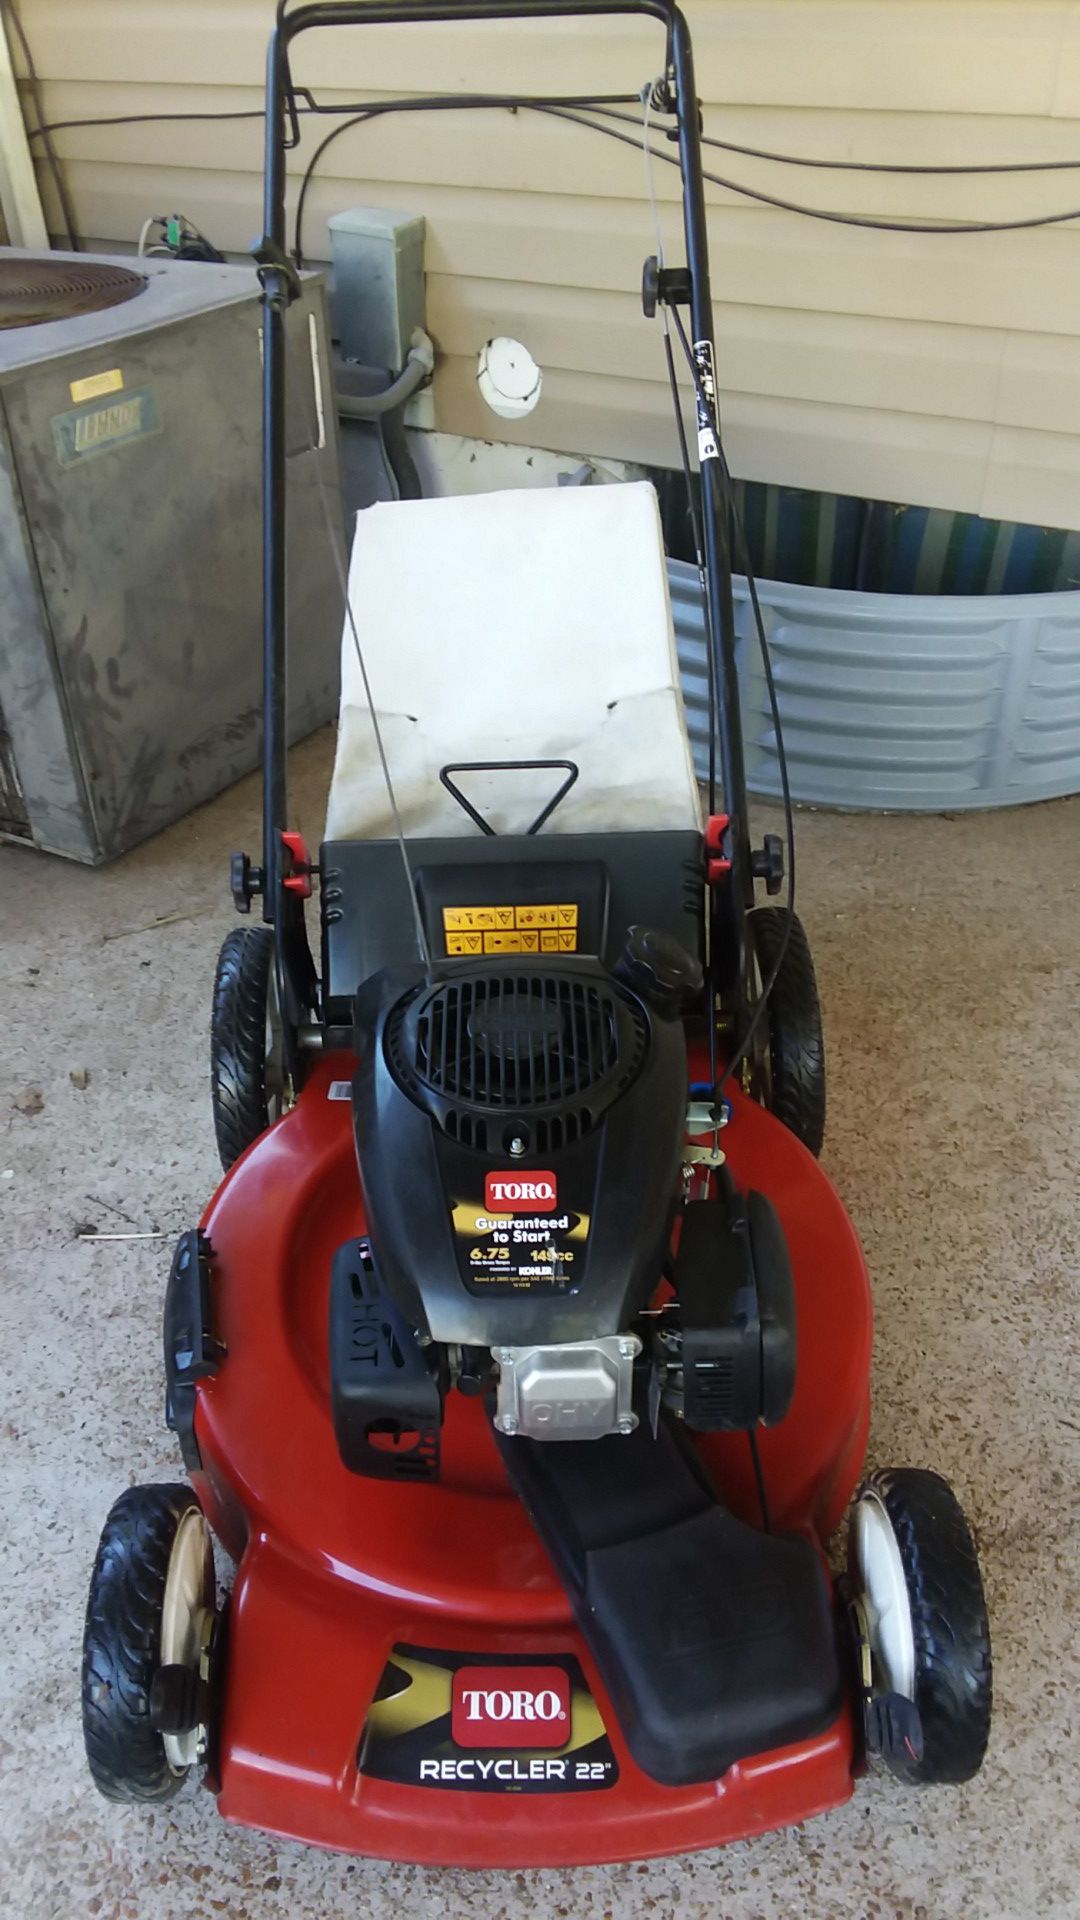 Toro self-propelled mower 6.75 for sale w bag full service be done new oil new filter sharp blade